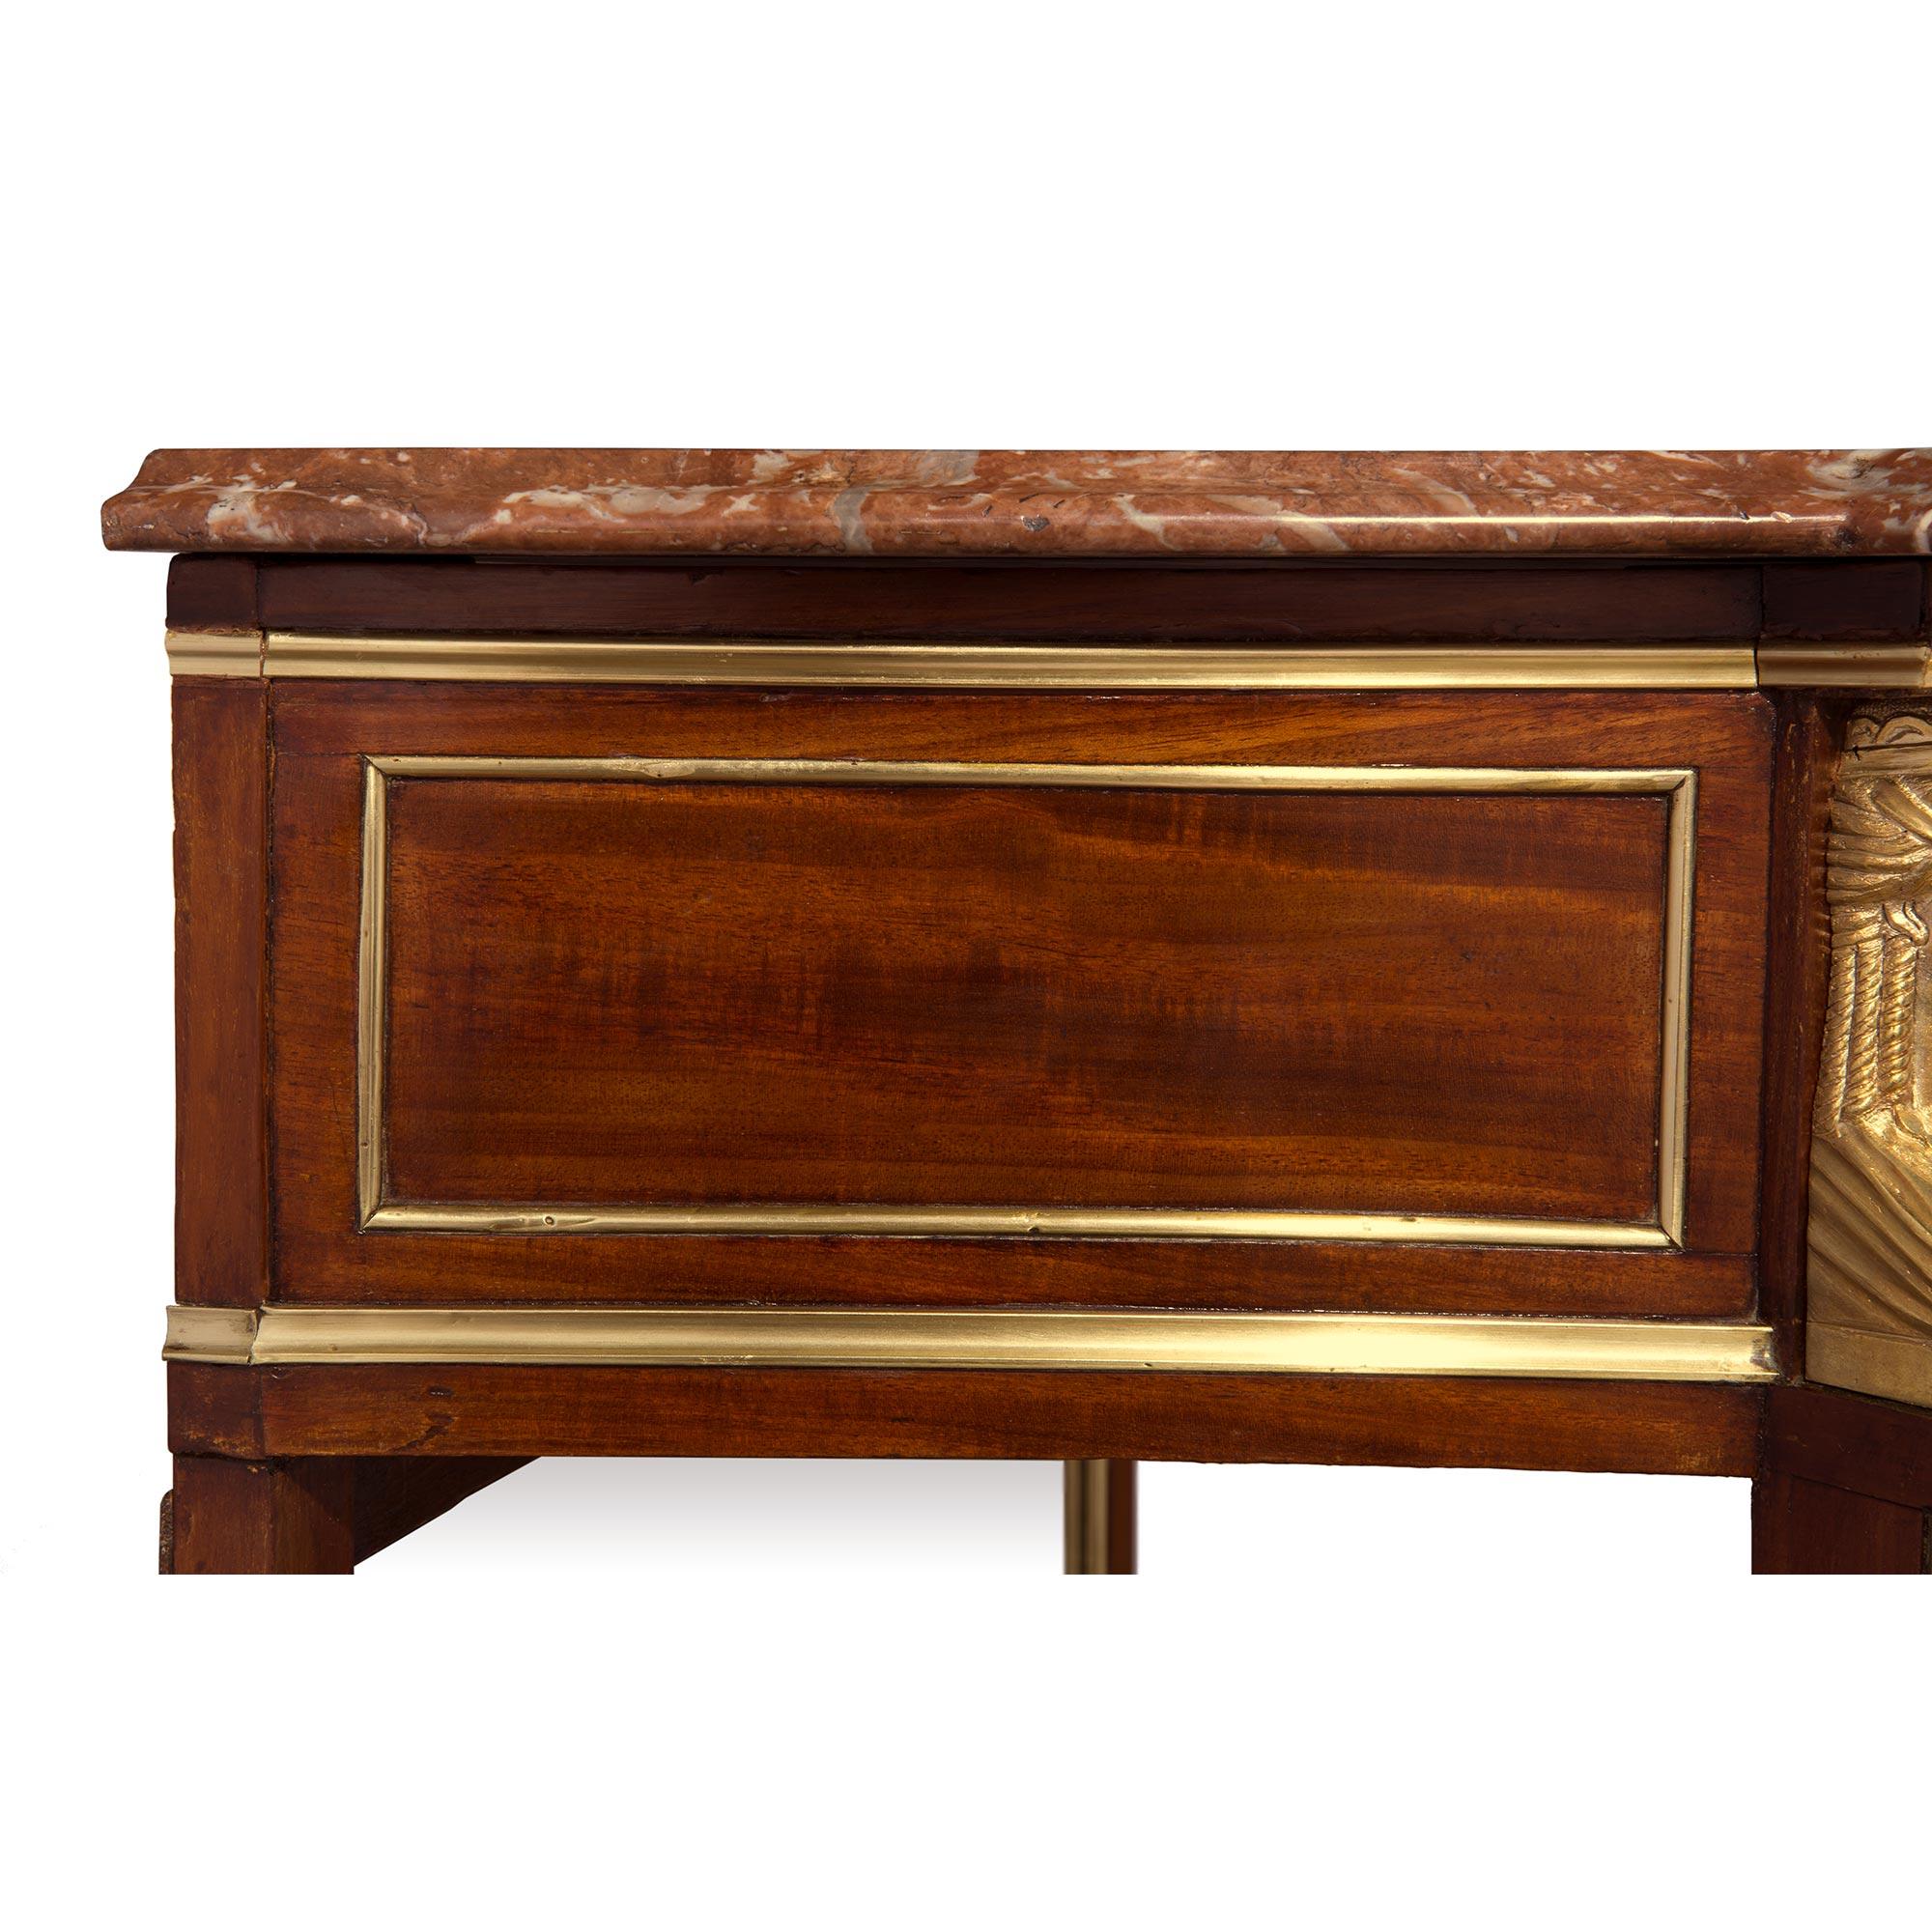 French 19th Century Neoclassical Style Mahogany, Ormolu and Marble Console For Sale 2